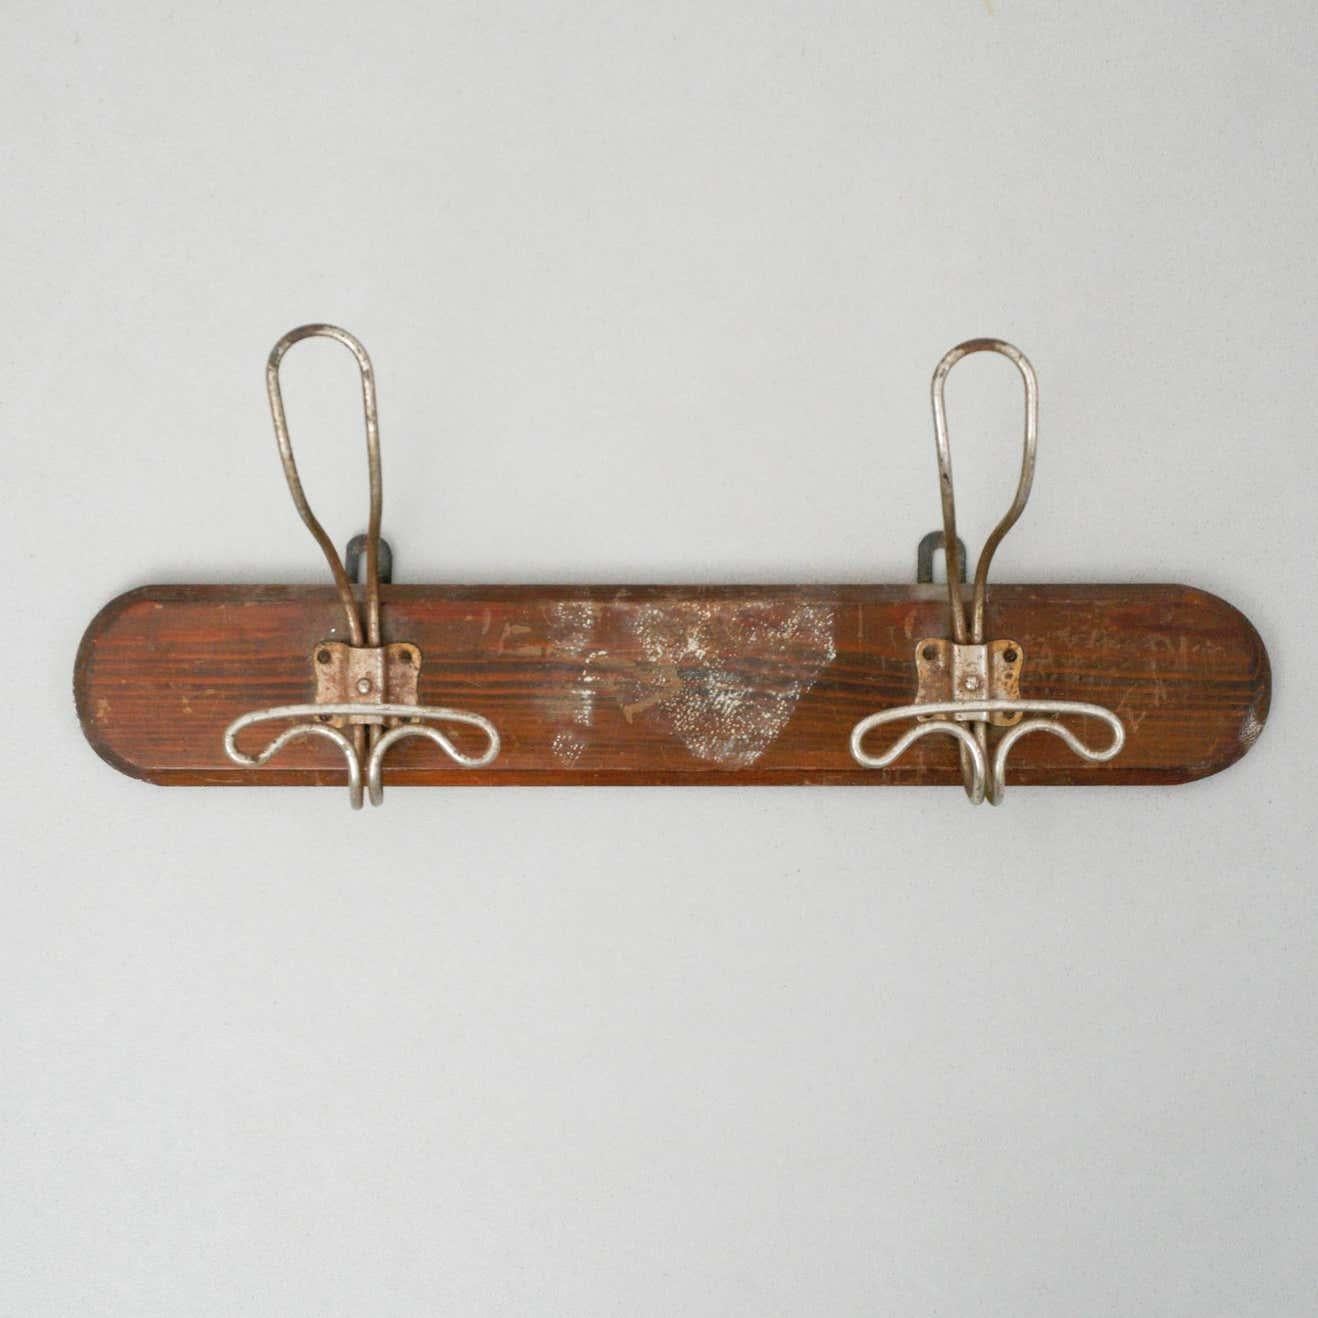 Wood and metal coat rack, circa 1930.
By unknown manufacturer. (France).

In original condition, with wear consistent of age and use, preserving a beautiful patina.